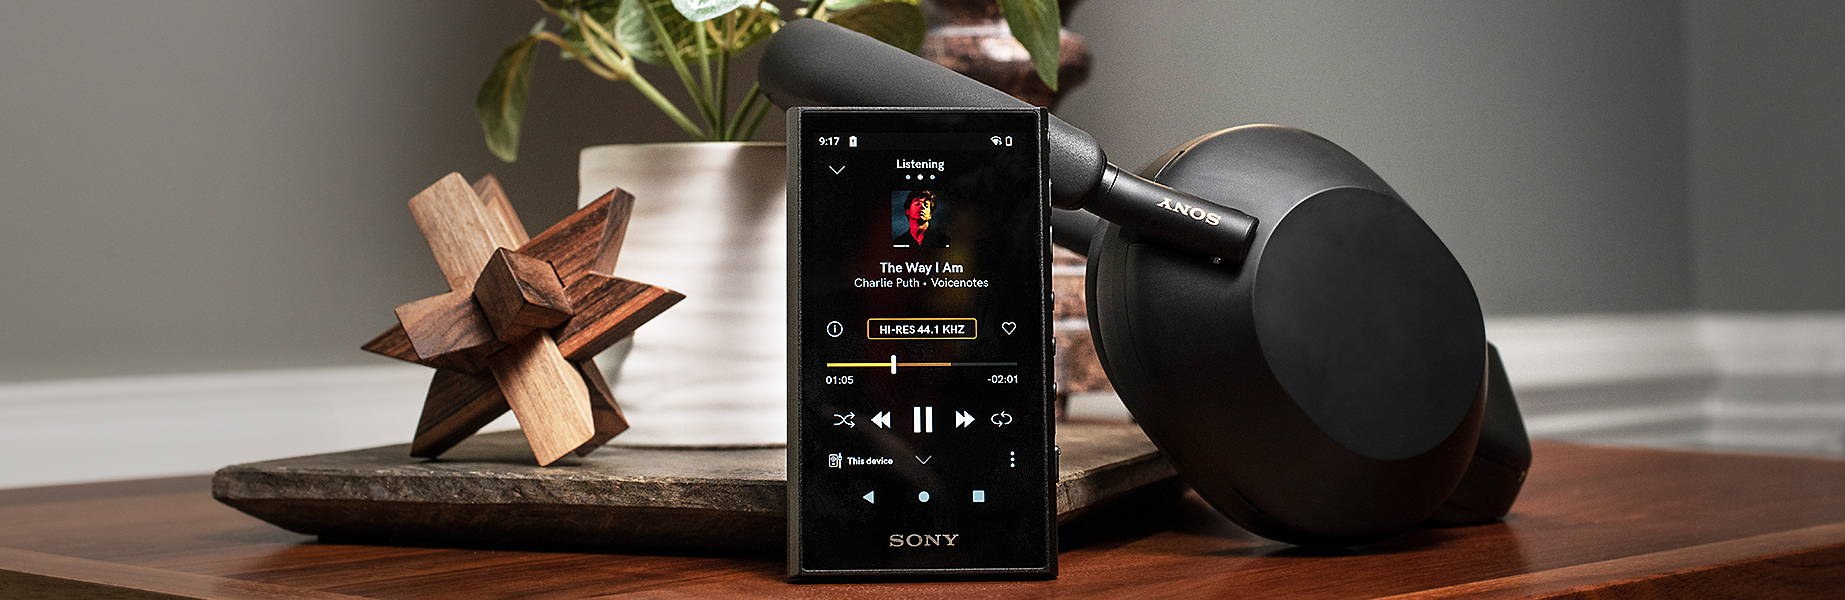 Sony NW-A306 DAP Music Player Review - Moon Audio